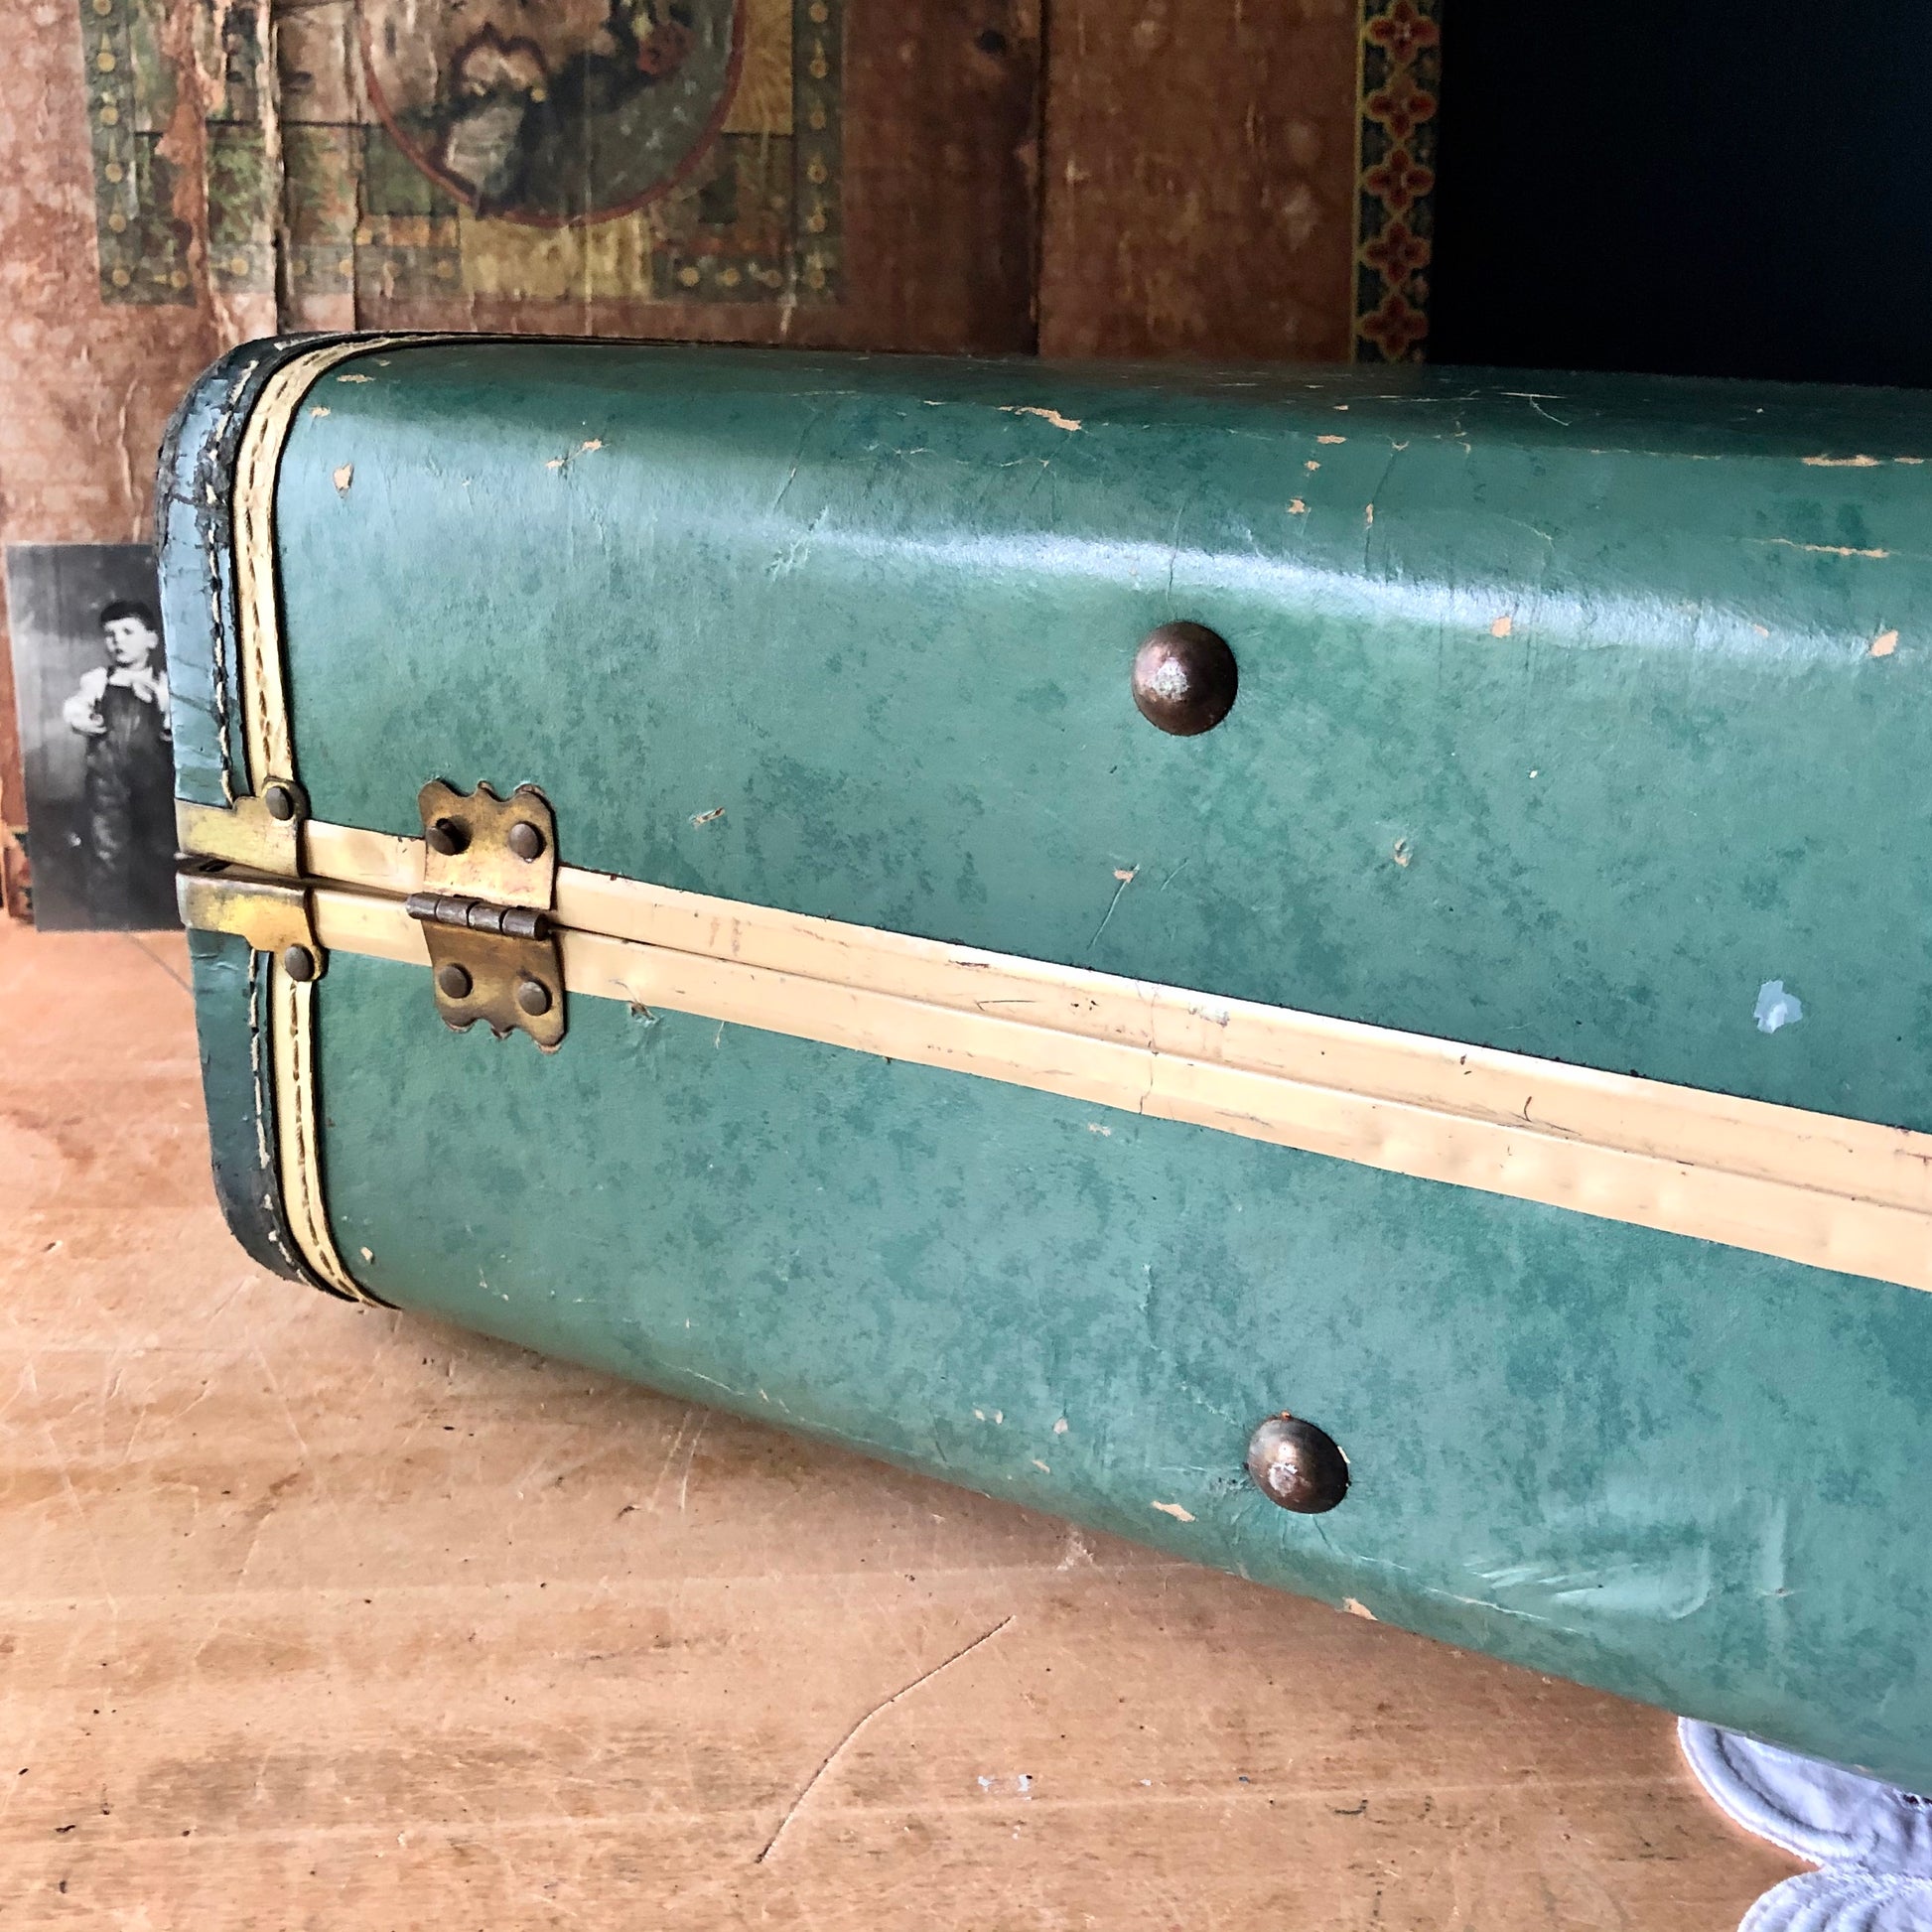 Small Green Vintage Suitcase (c.1940s)